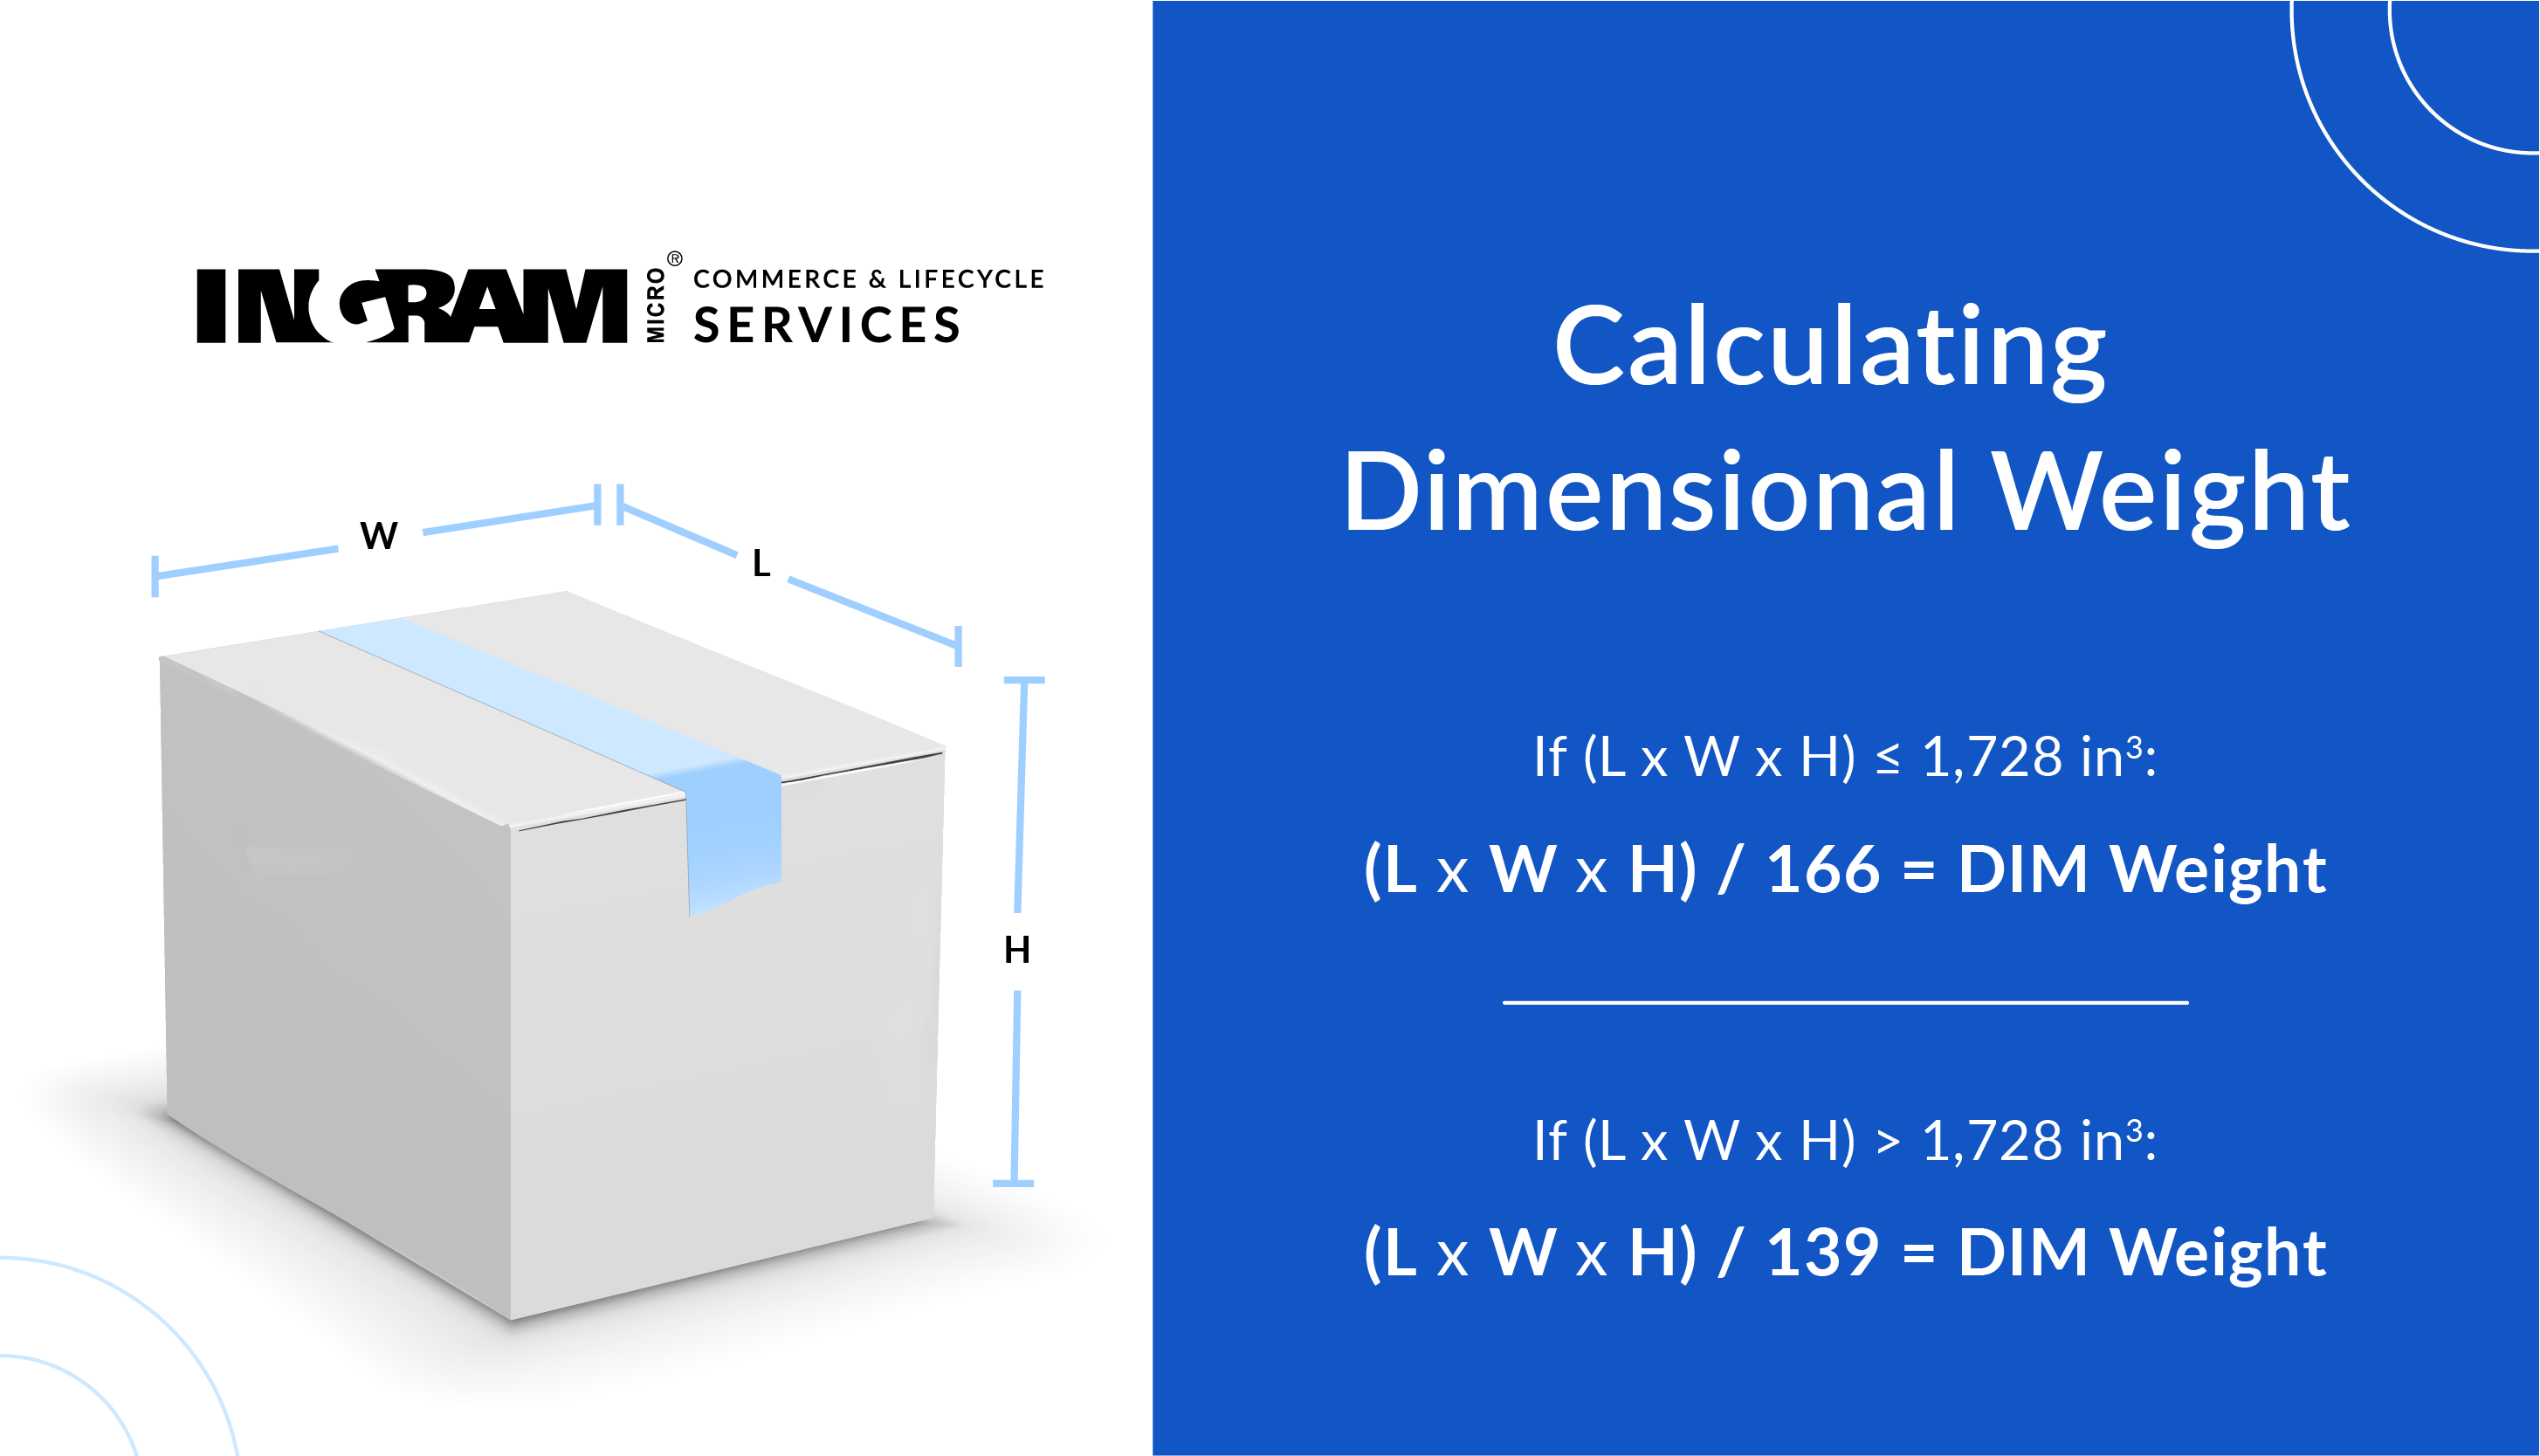 How to Calculate Dimensional Weight